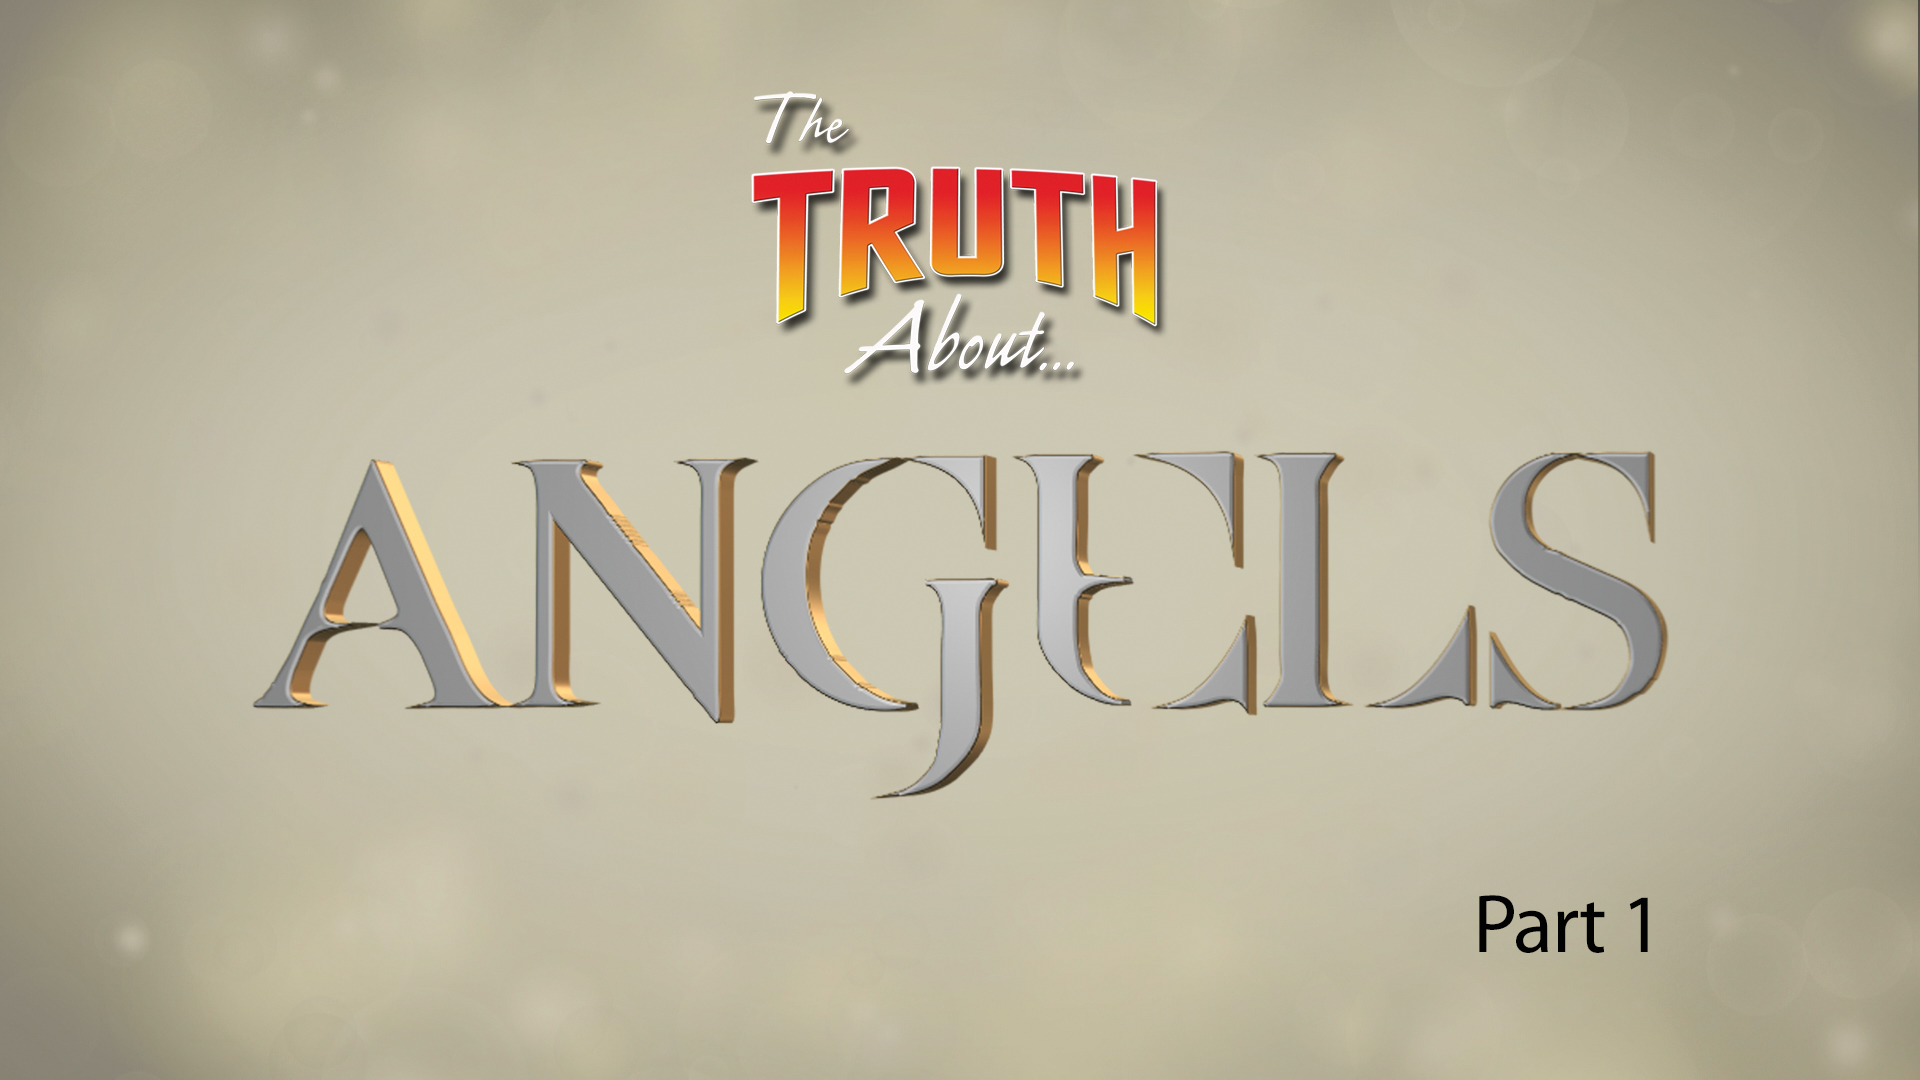 The Truth About Angels in the Bible